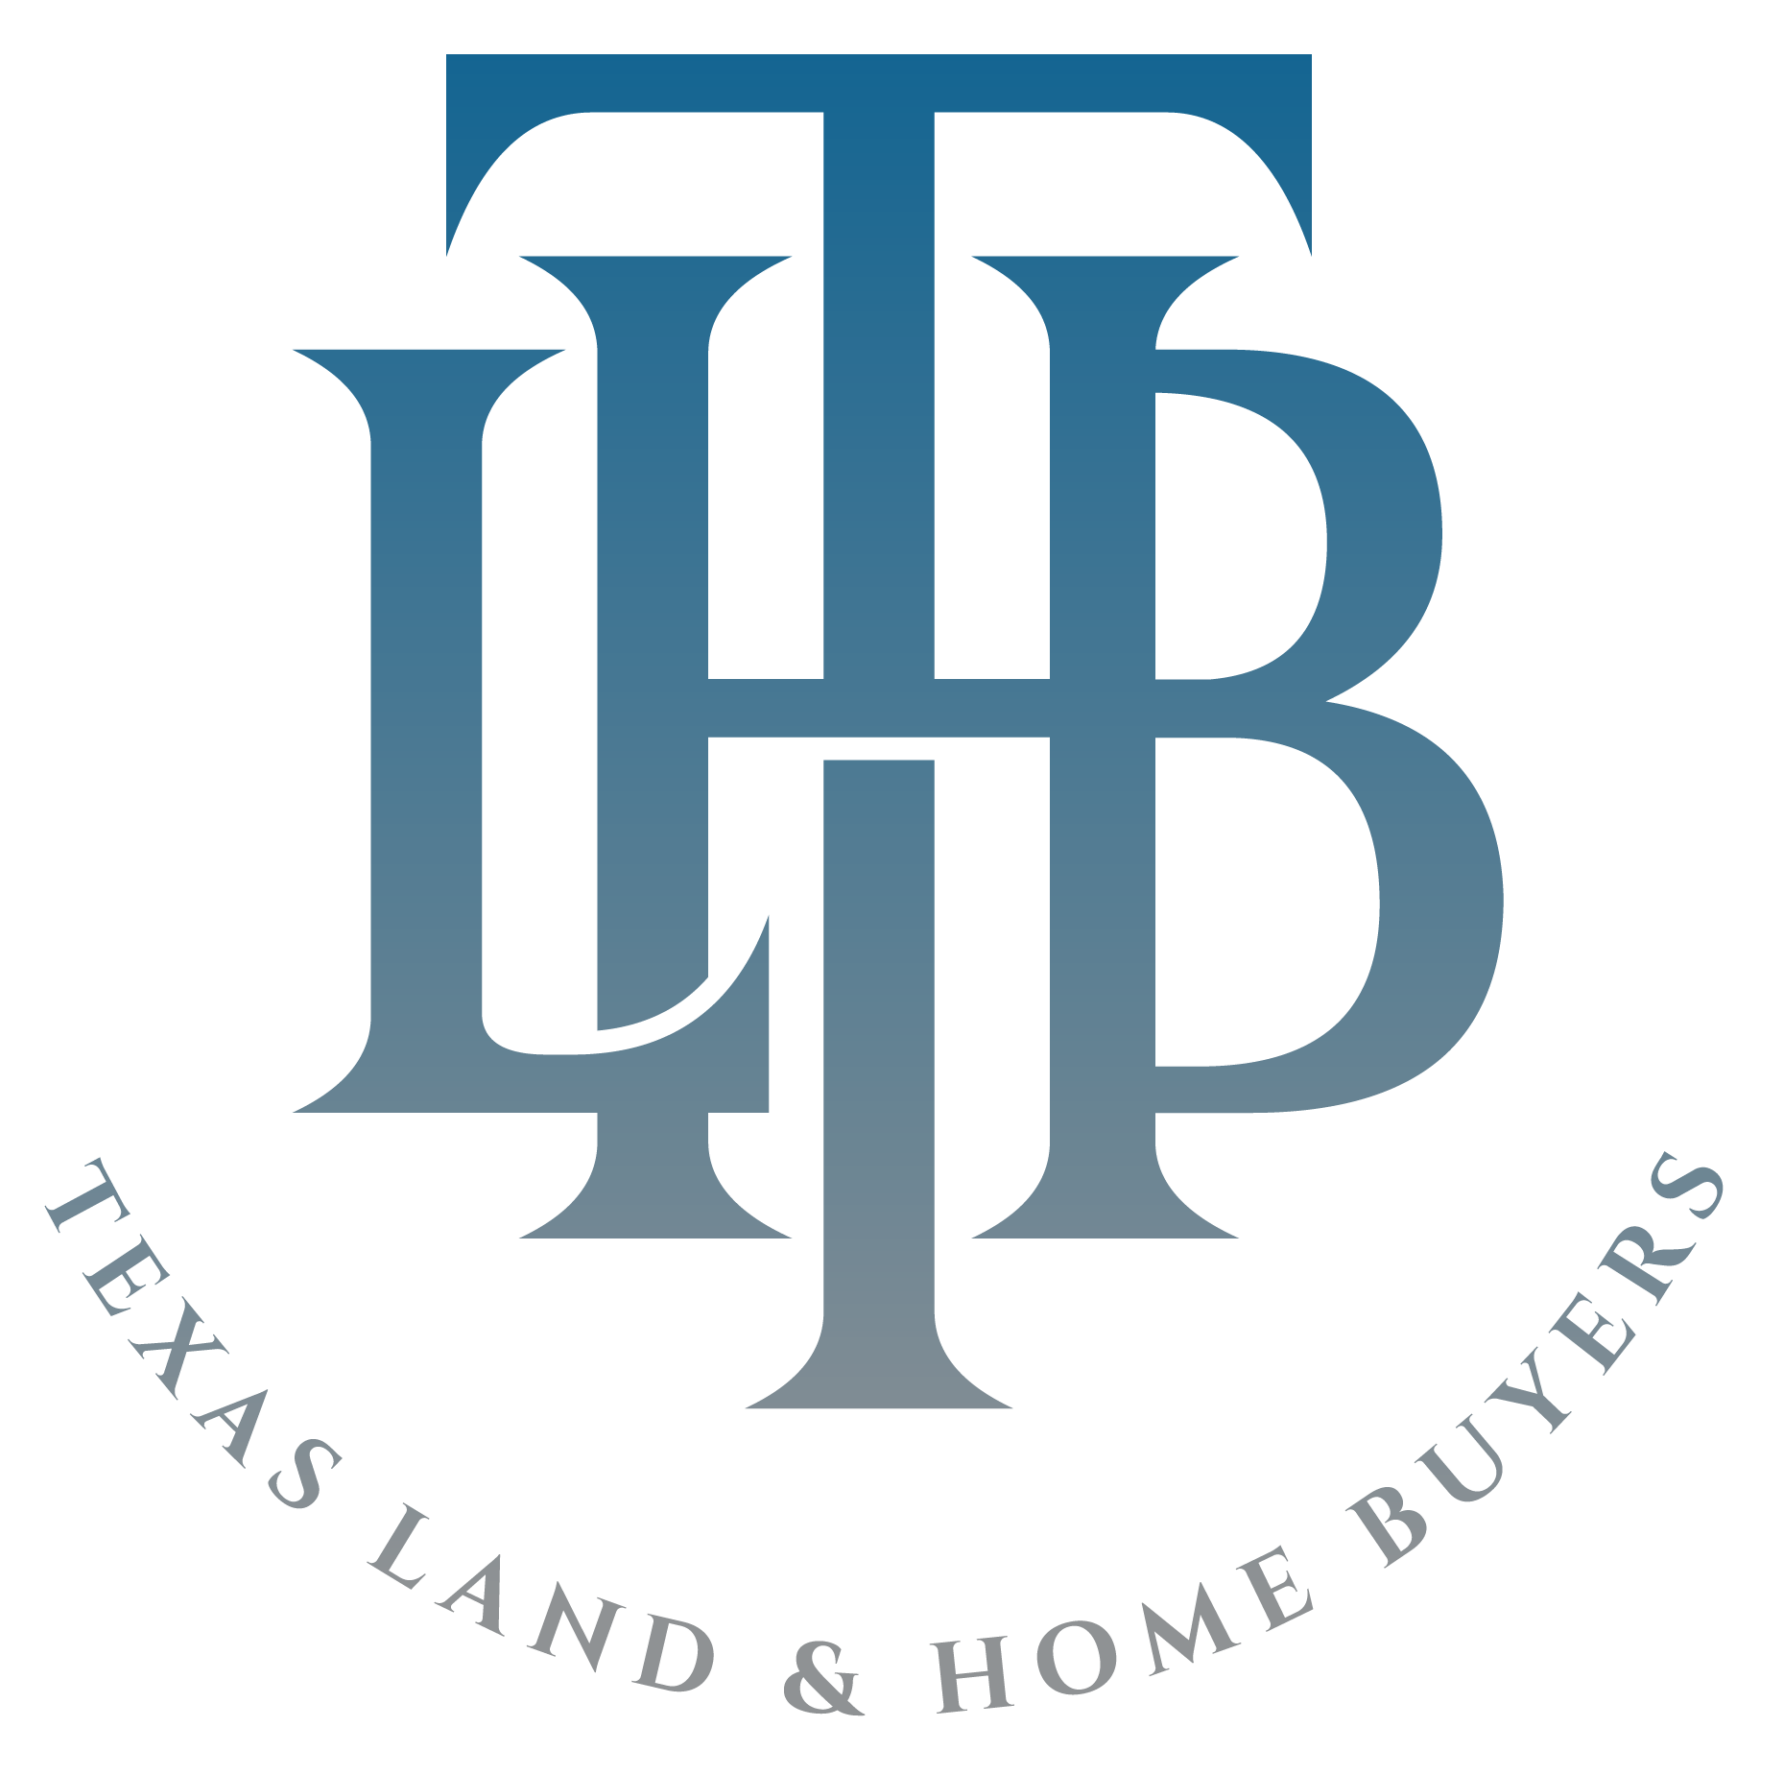 Texas Land and Home Buyers logo